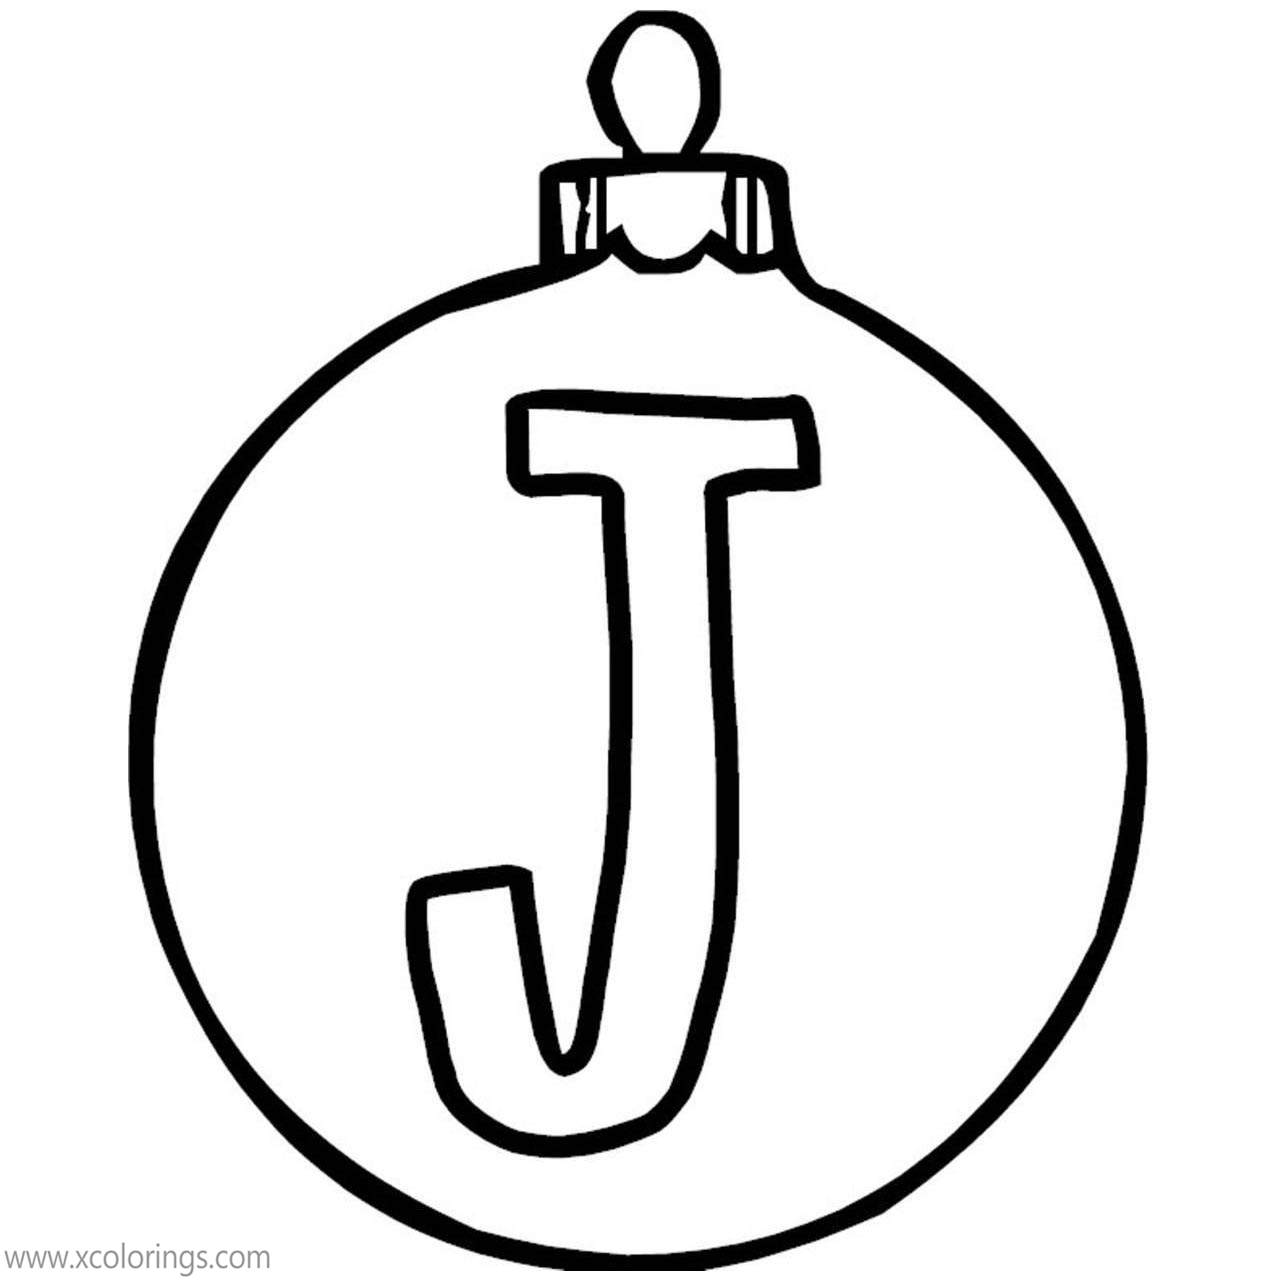 Free Letter J Christmas Ornament Coloring Pages printable